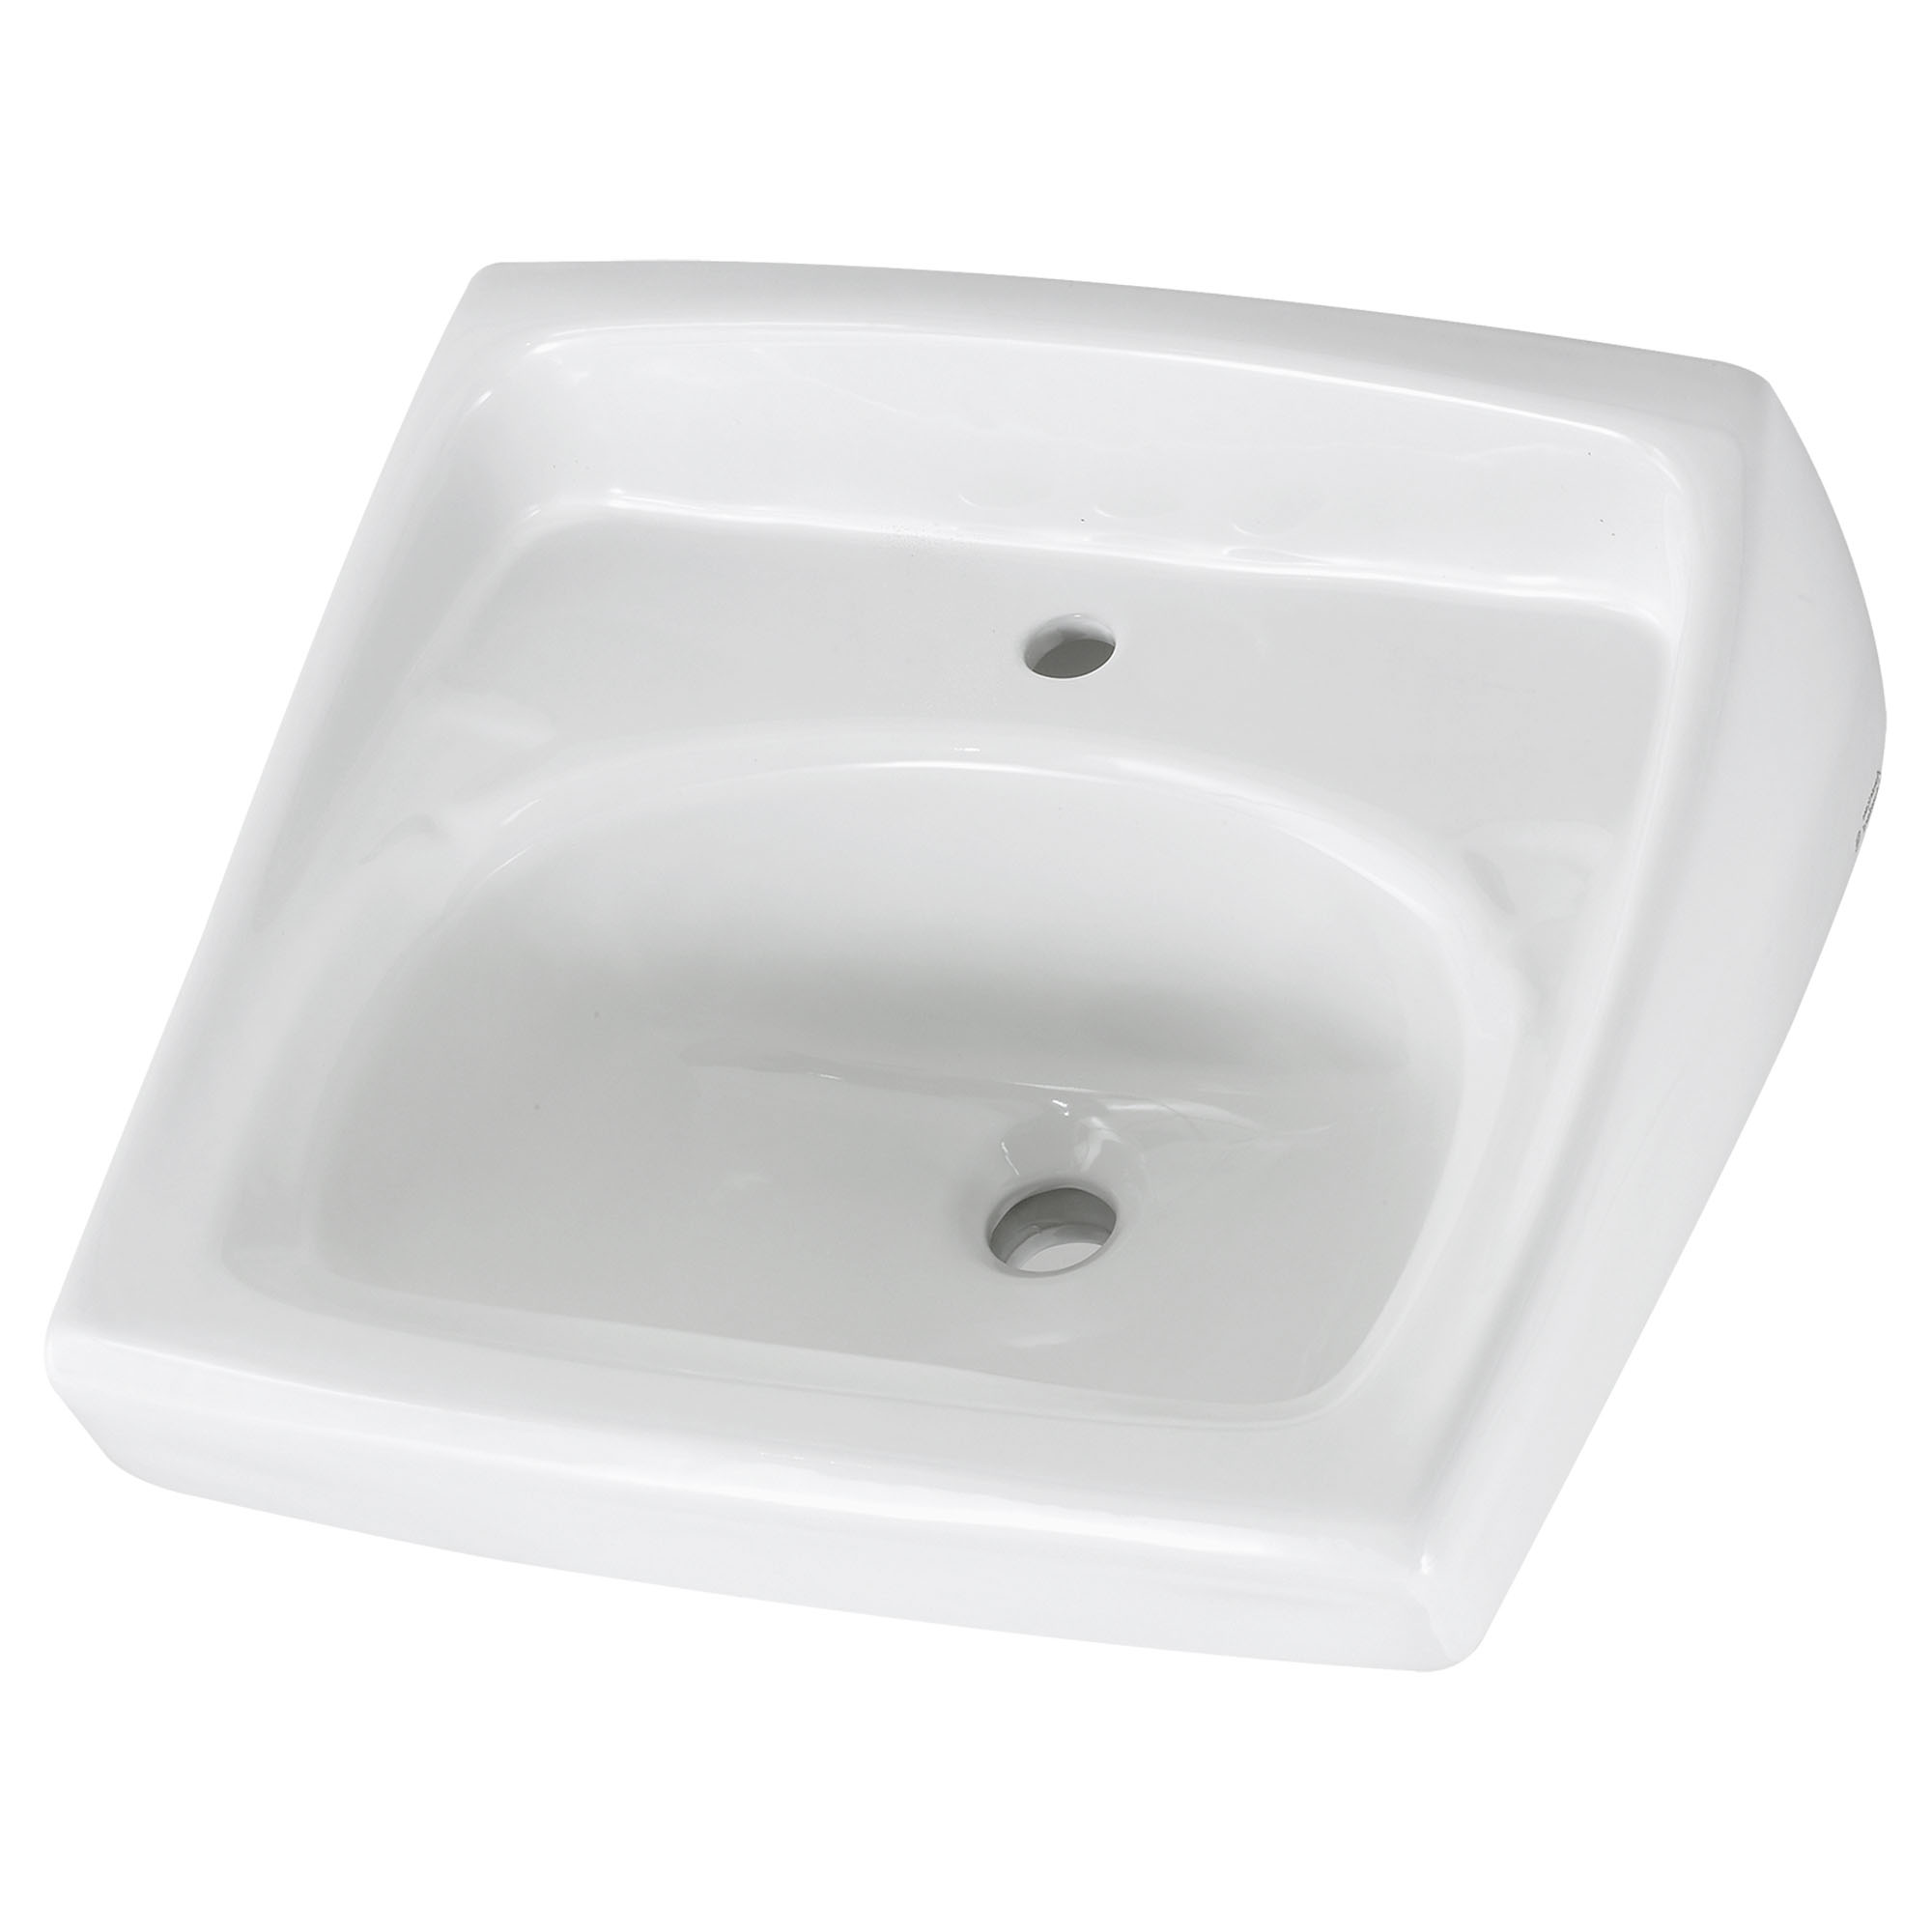 Lucerne Wall-Hung Sink for Exposed Bracket Support With Center Hole Only